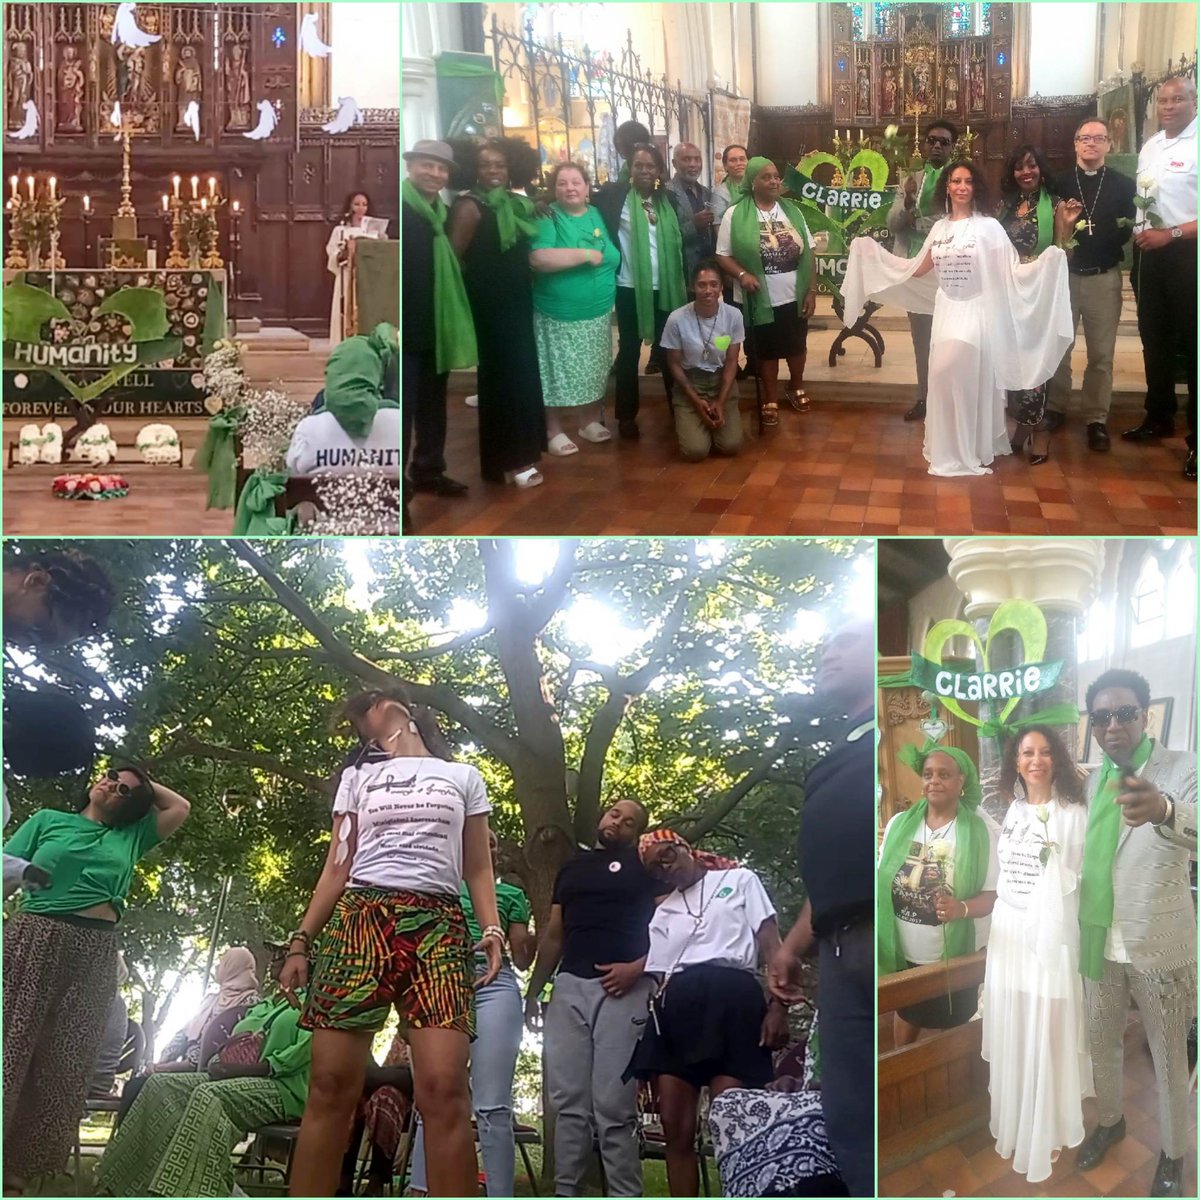 #KamitanArts #Poetry4Grenfell fam commemorate Grenfell in a holistic & spiritual manner #Grenfell6YrAnniversary ☥ Th'ankh u to @H4Grenfell family for keeping Aunty Clarrie's vision alive @allsaintandst1 joined with families, friends & loved 1's & @LancWEstate creative healing💚